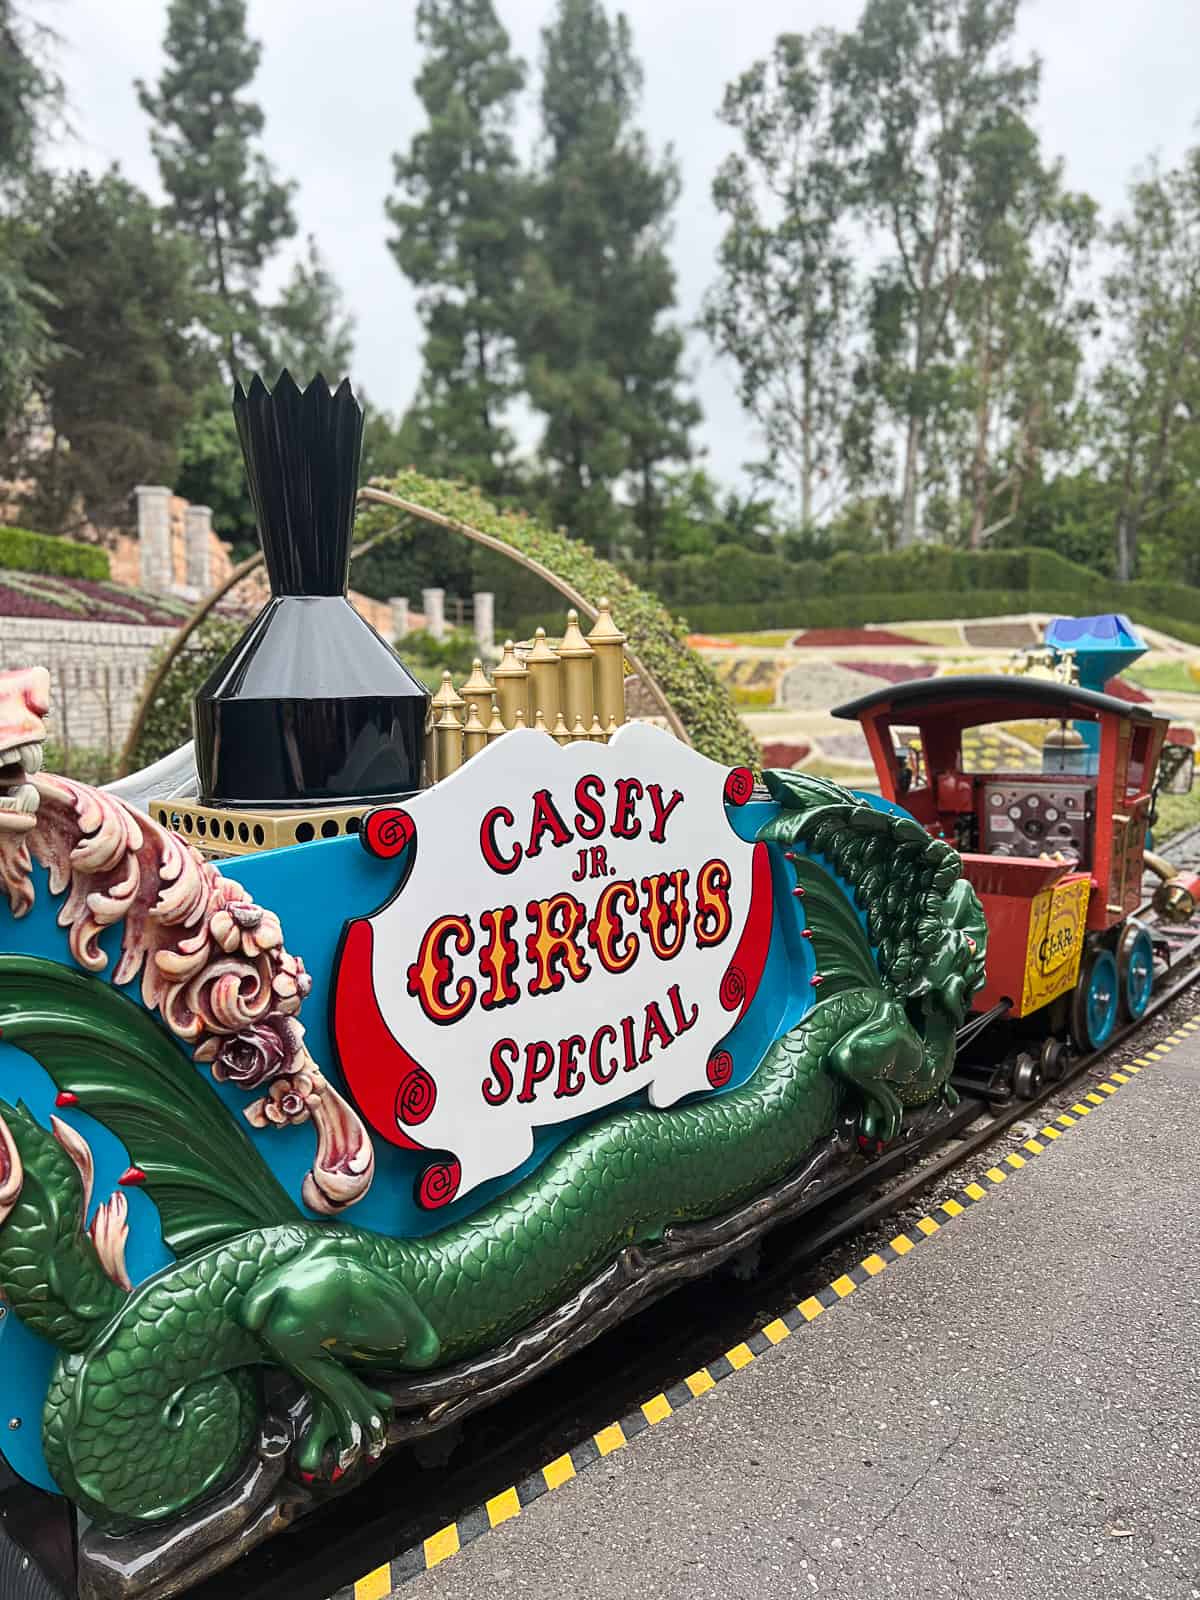 Casey JR train ride recommendation for a Disneyland itinerary 1 Day with kids plan